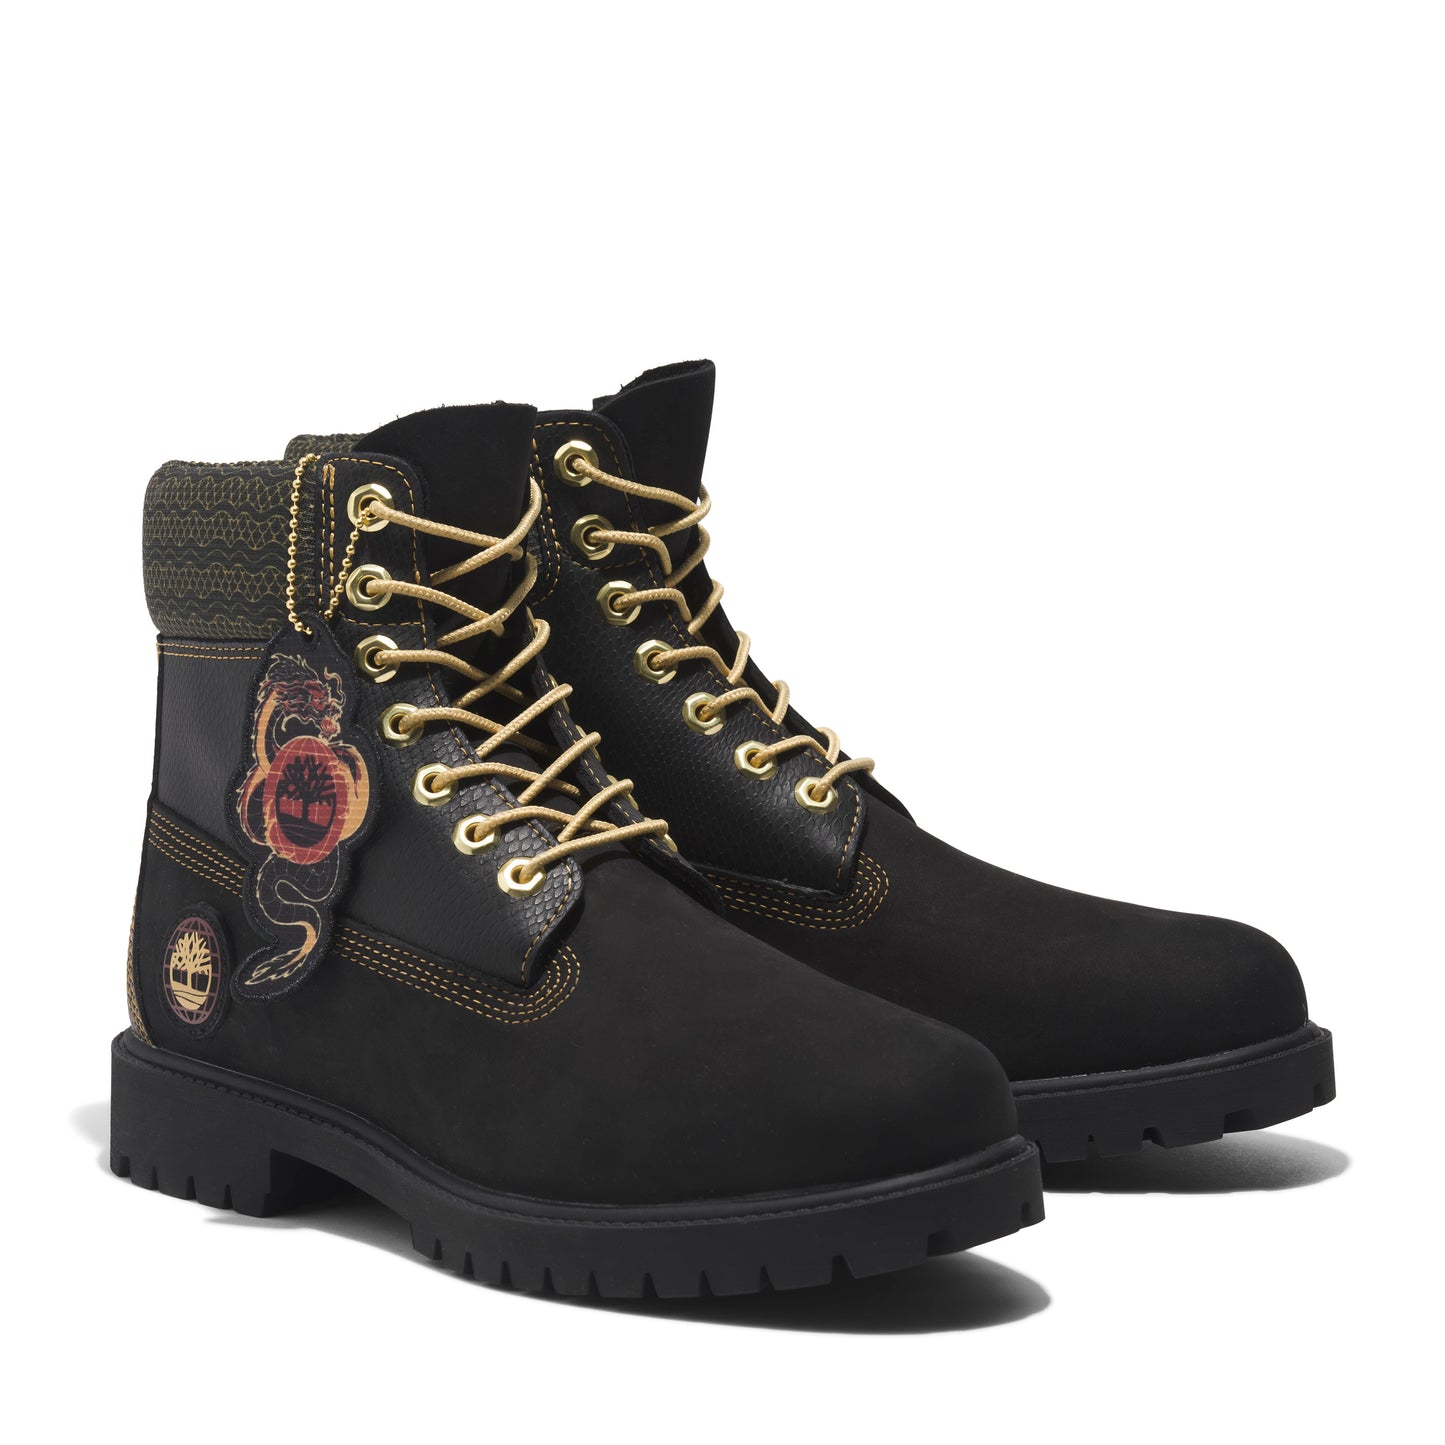 Heritage 6inch Wp Boot Black